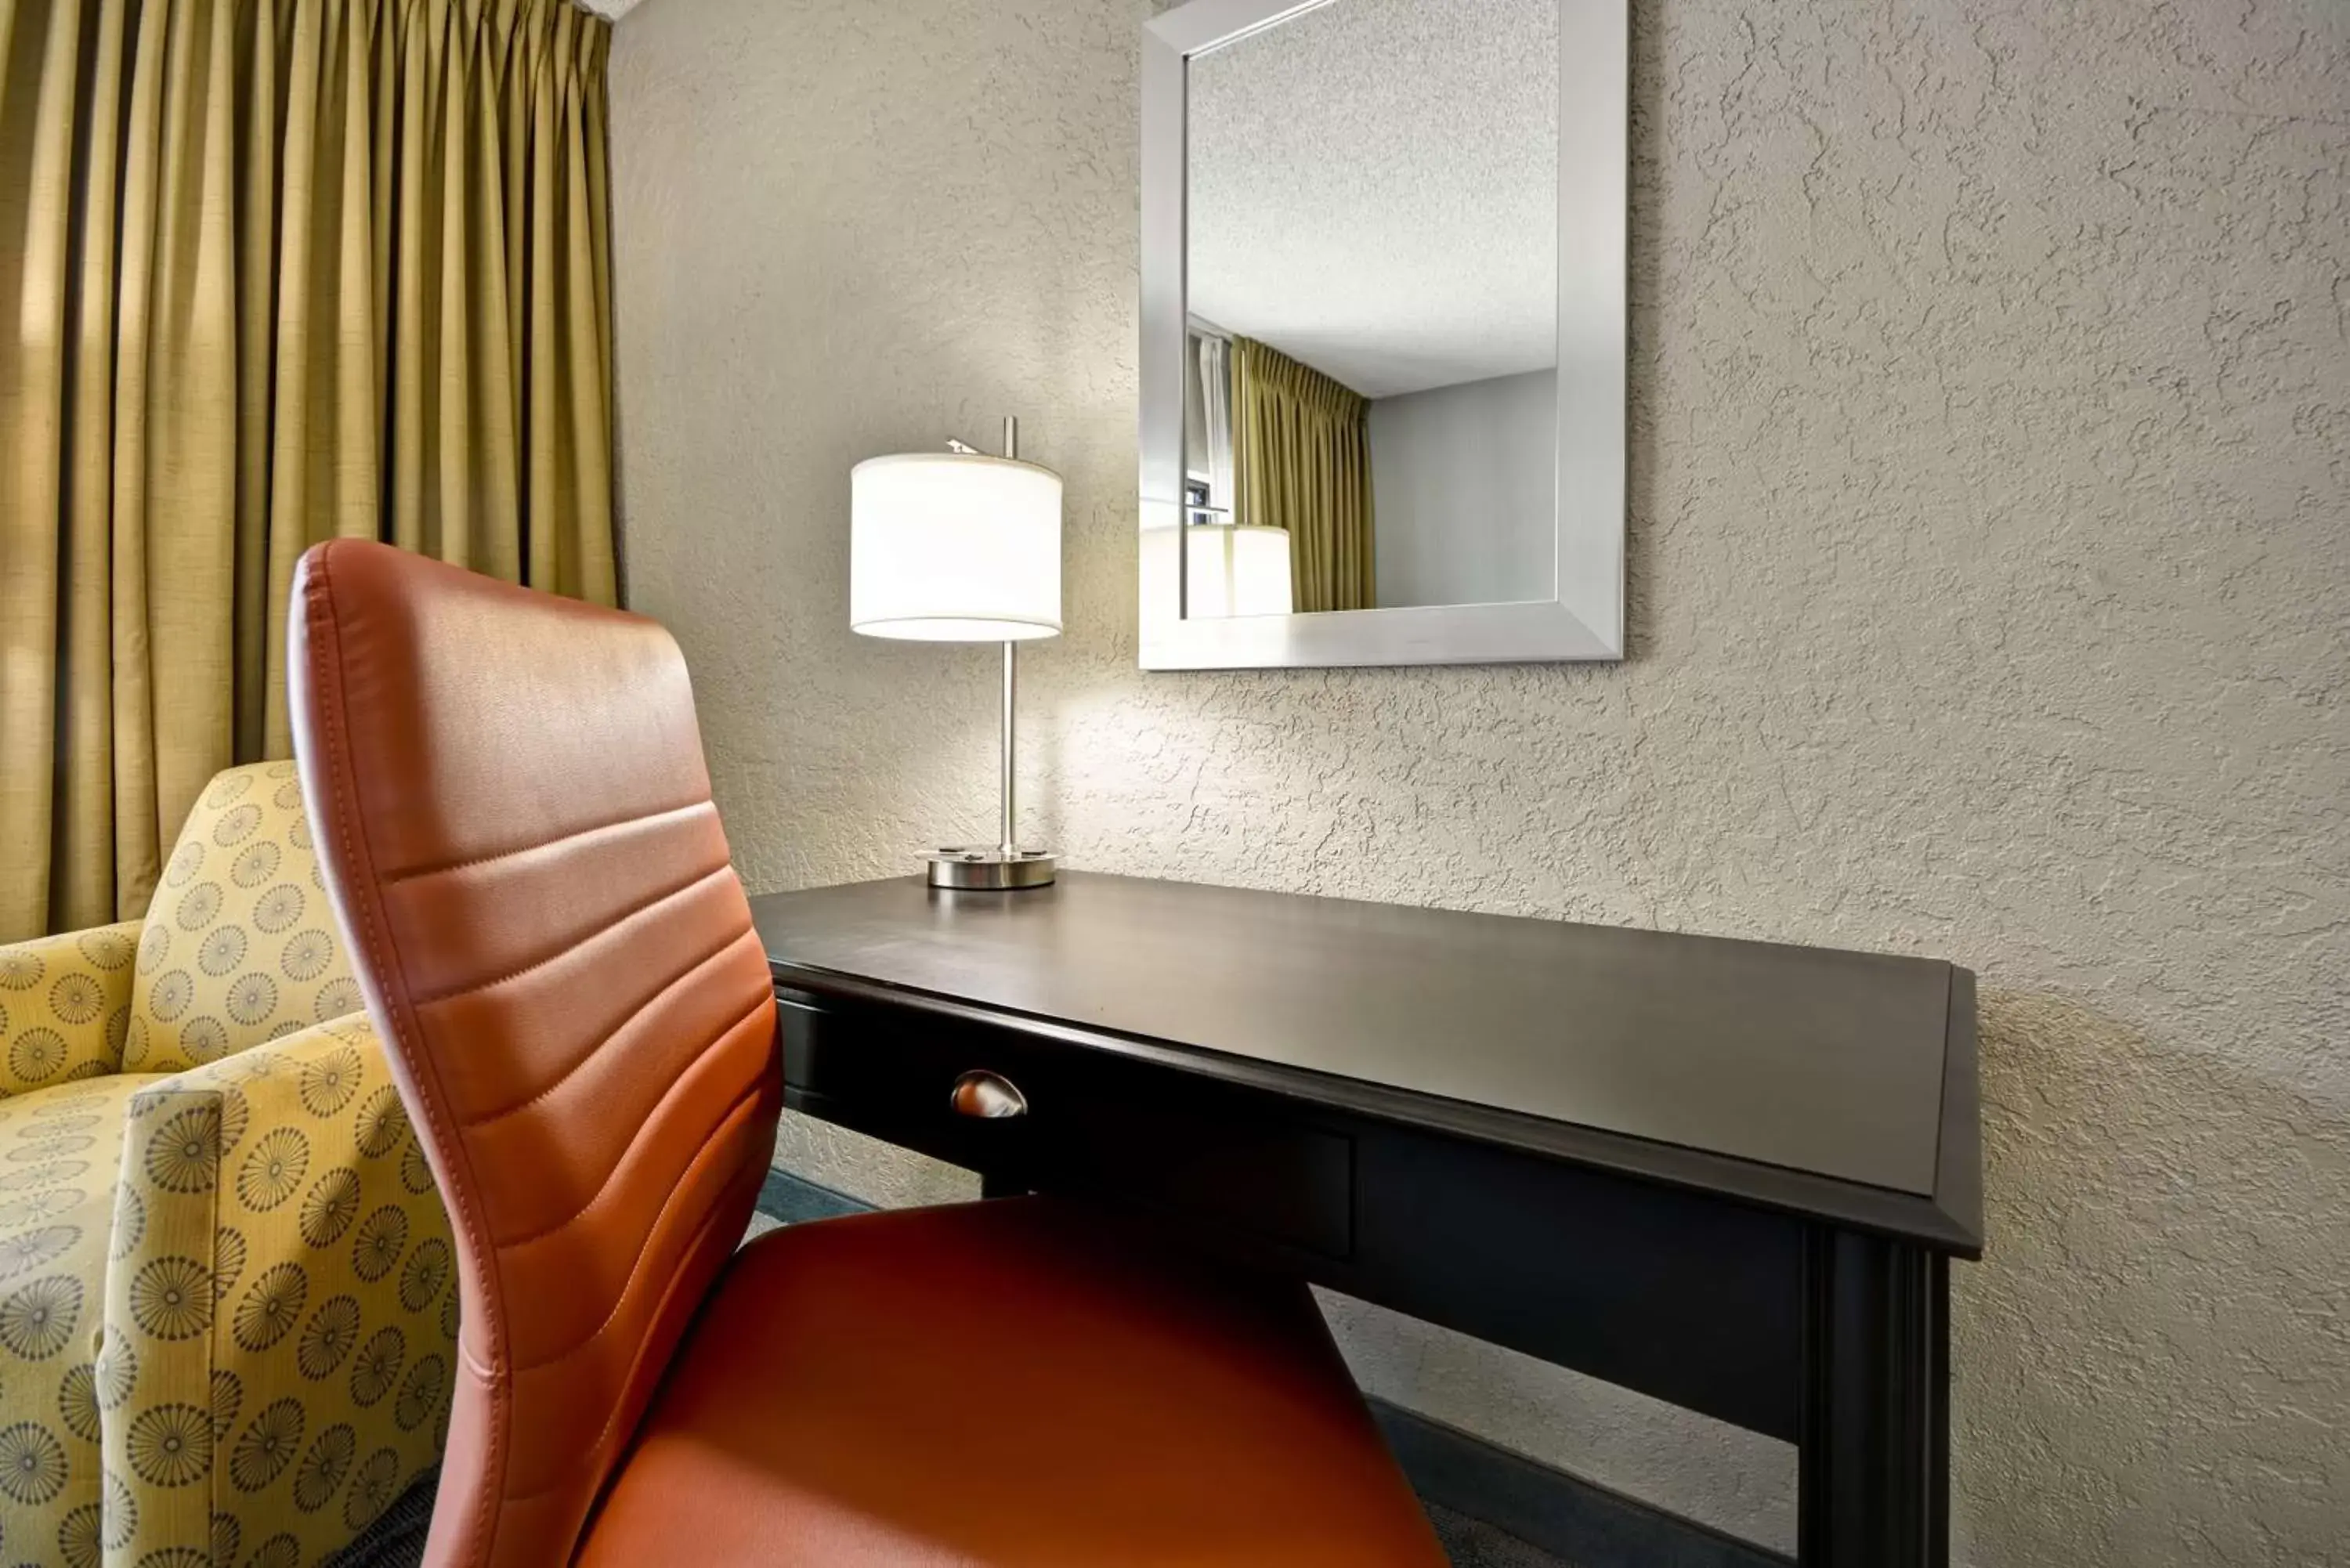 Bedroom, TV/Entertainment Center in DoubleTree by Hilton Phoenix North